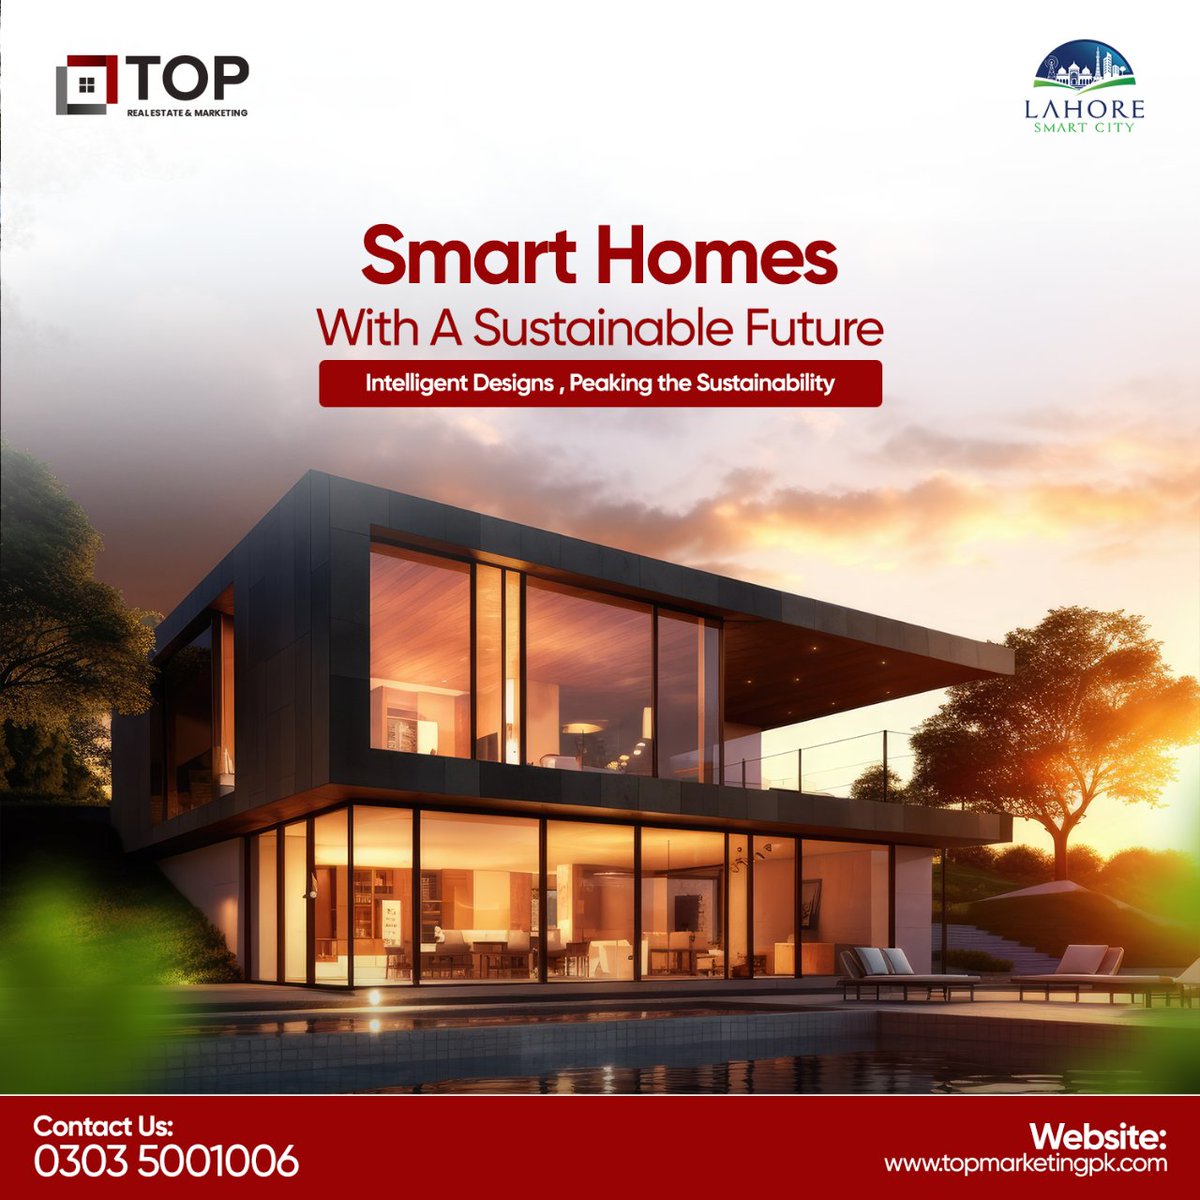 The smart homes in Lahore Smart City are designed to peak sustainability.

For Booking & Details, Call: 0303 5001006
#RealEstate #LSC #Investment #Property #TopMarketing #toprealestate #SmartCity #LahoreSmartCity #residentialinvestment #Overseasblock #smarthomes #smartvillas